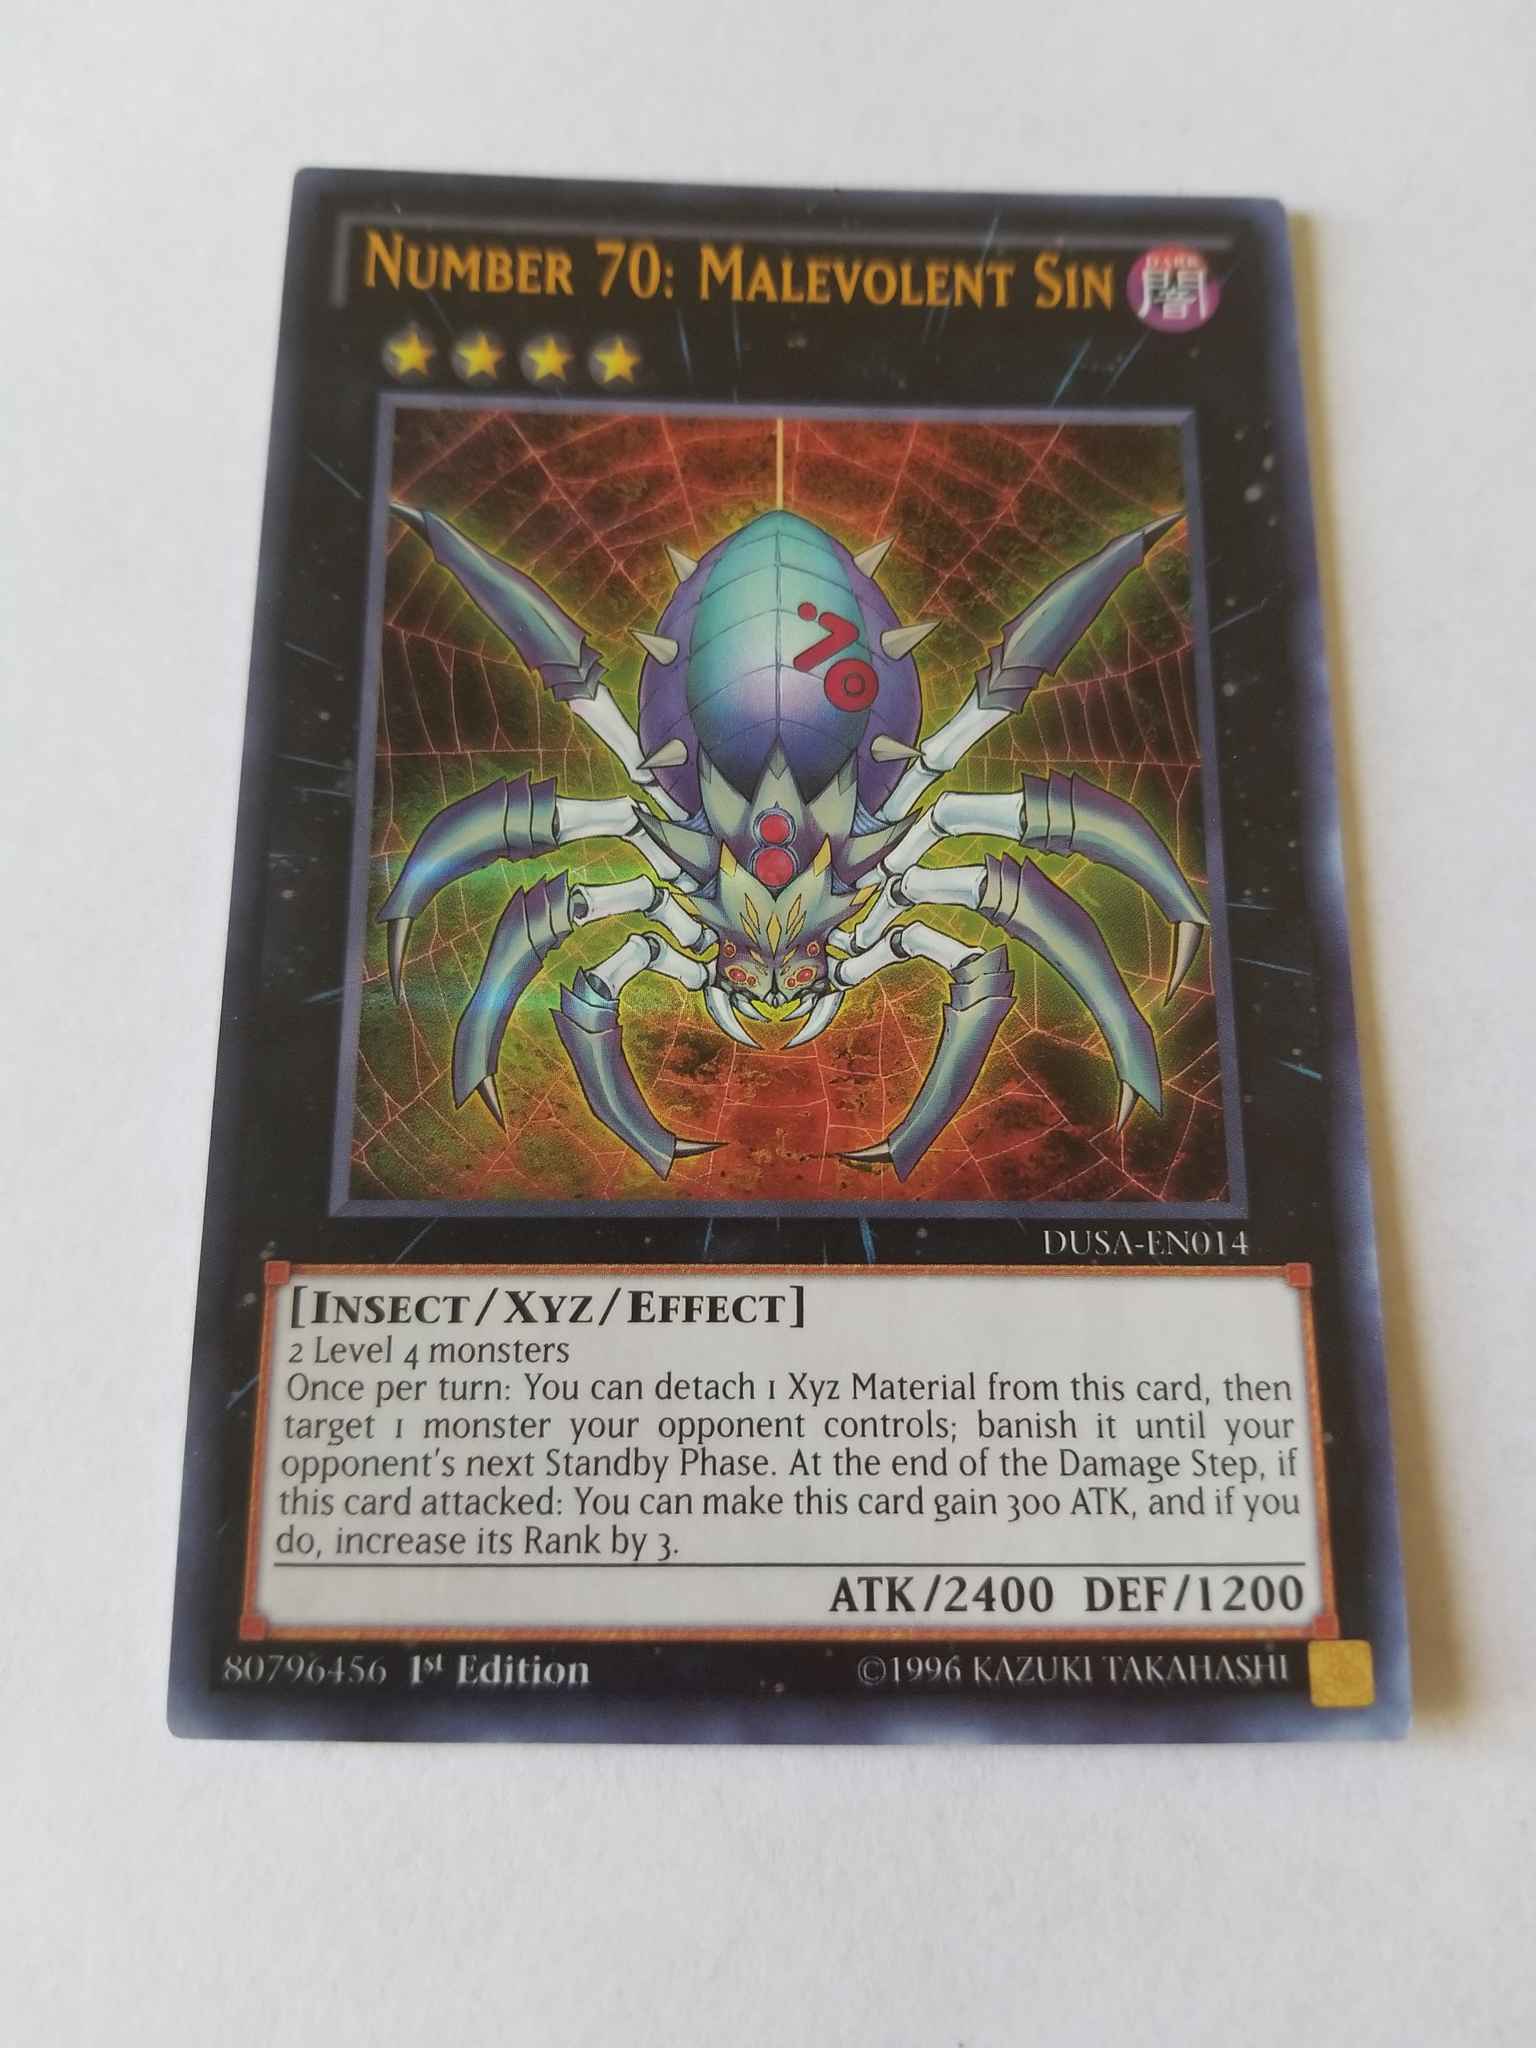 MALEVOLENT SIN ULTRA RARE DUSA-EN014 1ST EDITION INSECT XYZ YUGIOH NUMBER 70